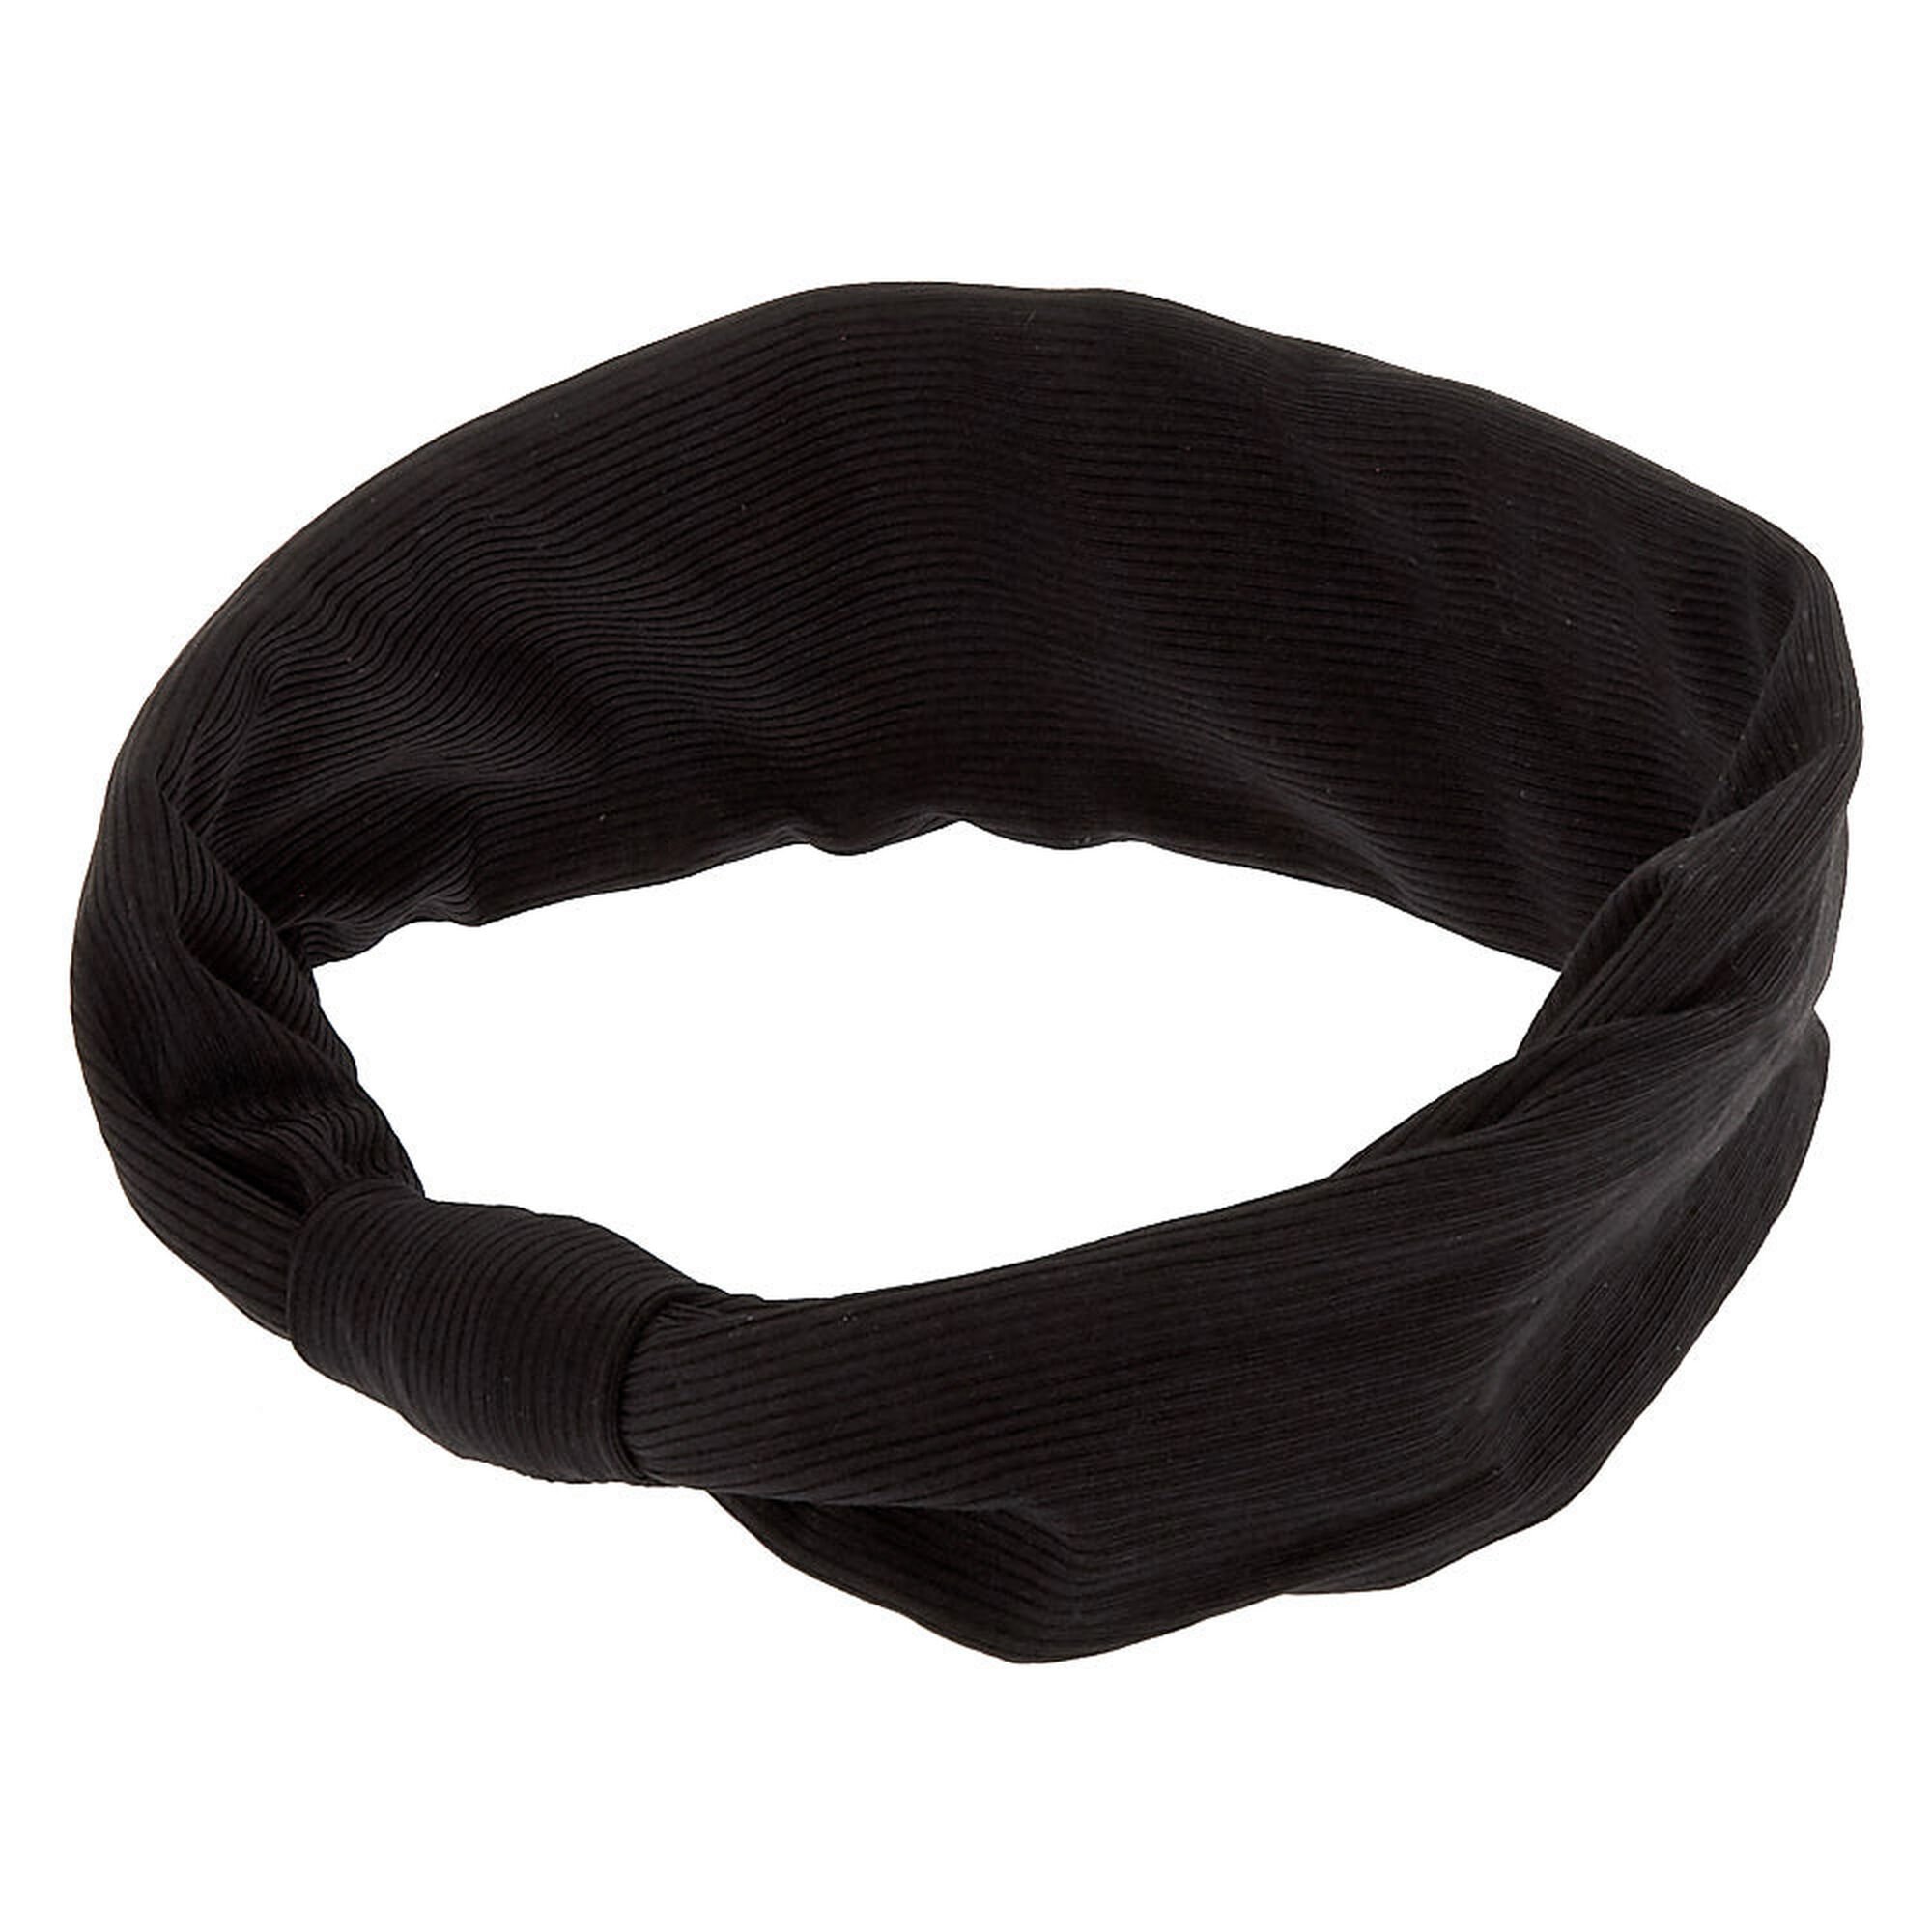 View Claires Wide Knotted Headwrap Black information